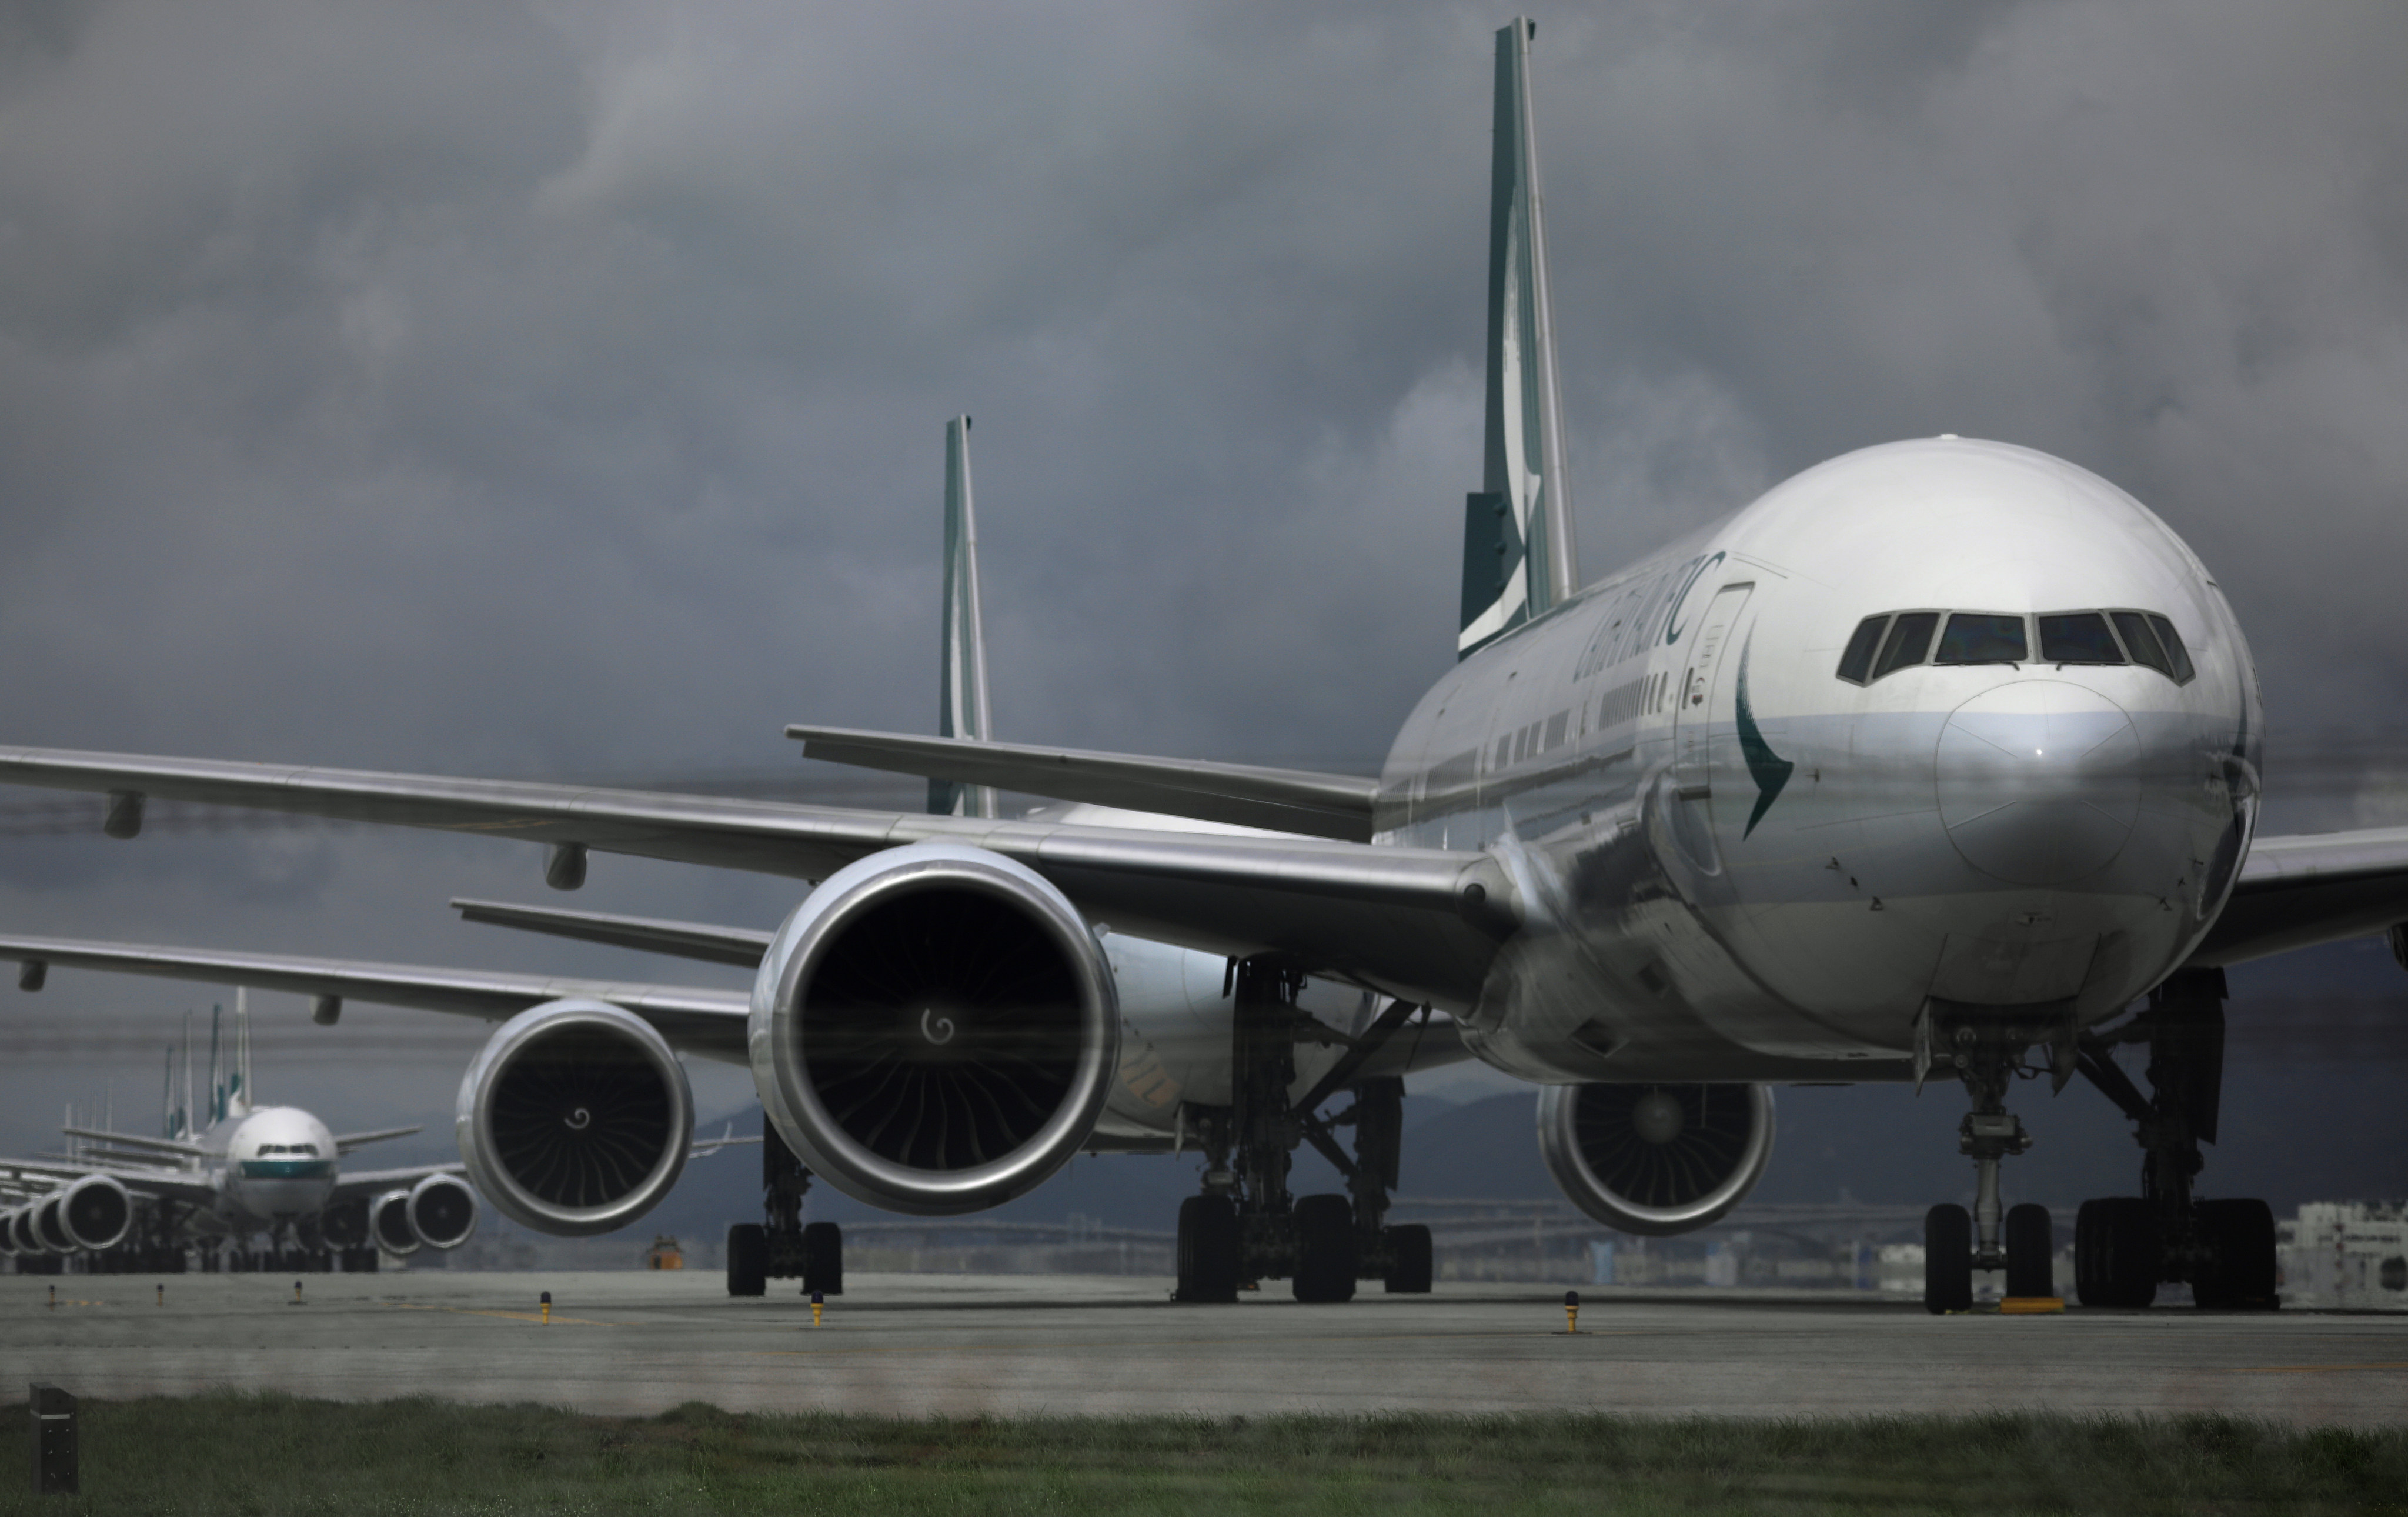 Cathay Pacific has said it will investigate any future cases of pilots going too slow while taxiing. Photo: Sam Tsang